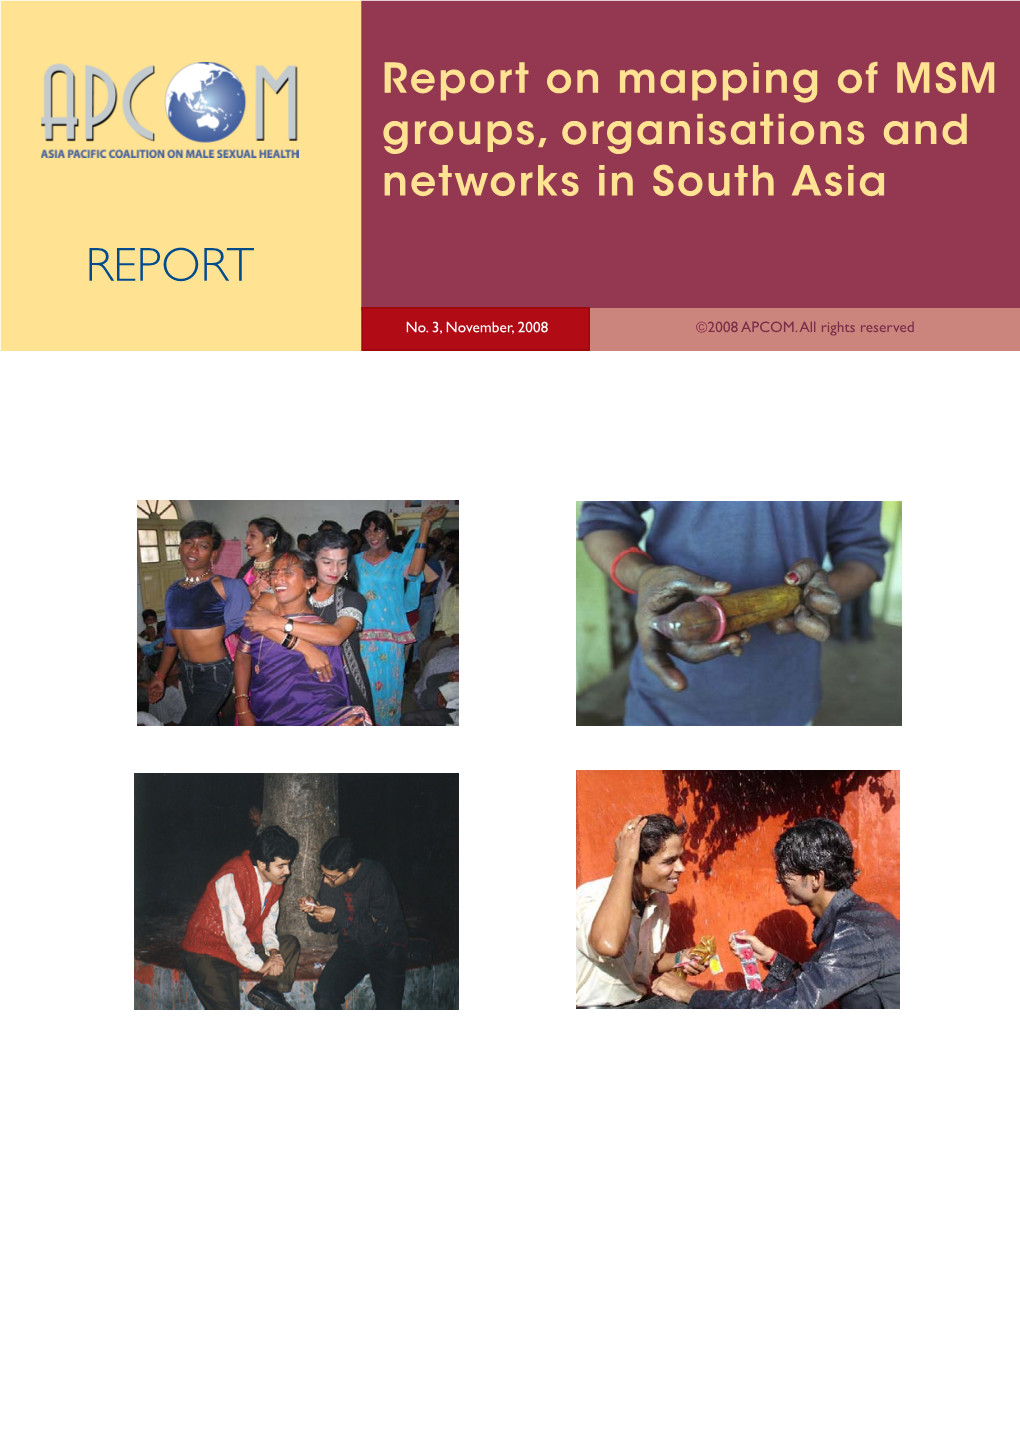 Report on Mapping MSM Groups, Organisations and Networks in South Asia